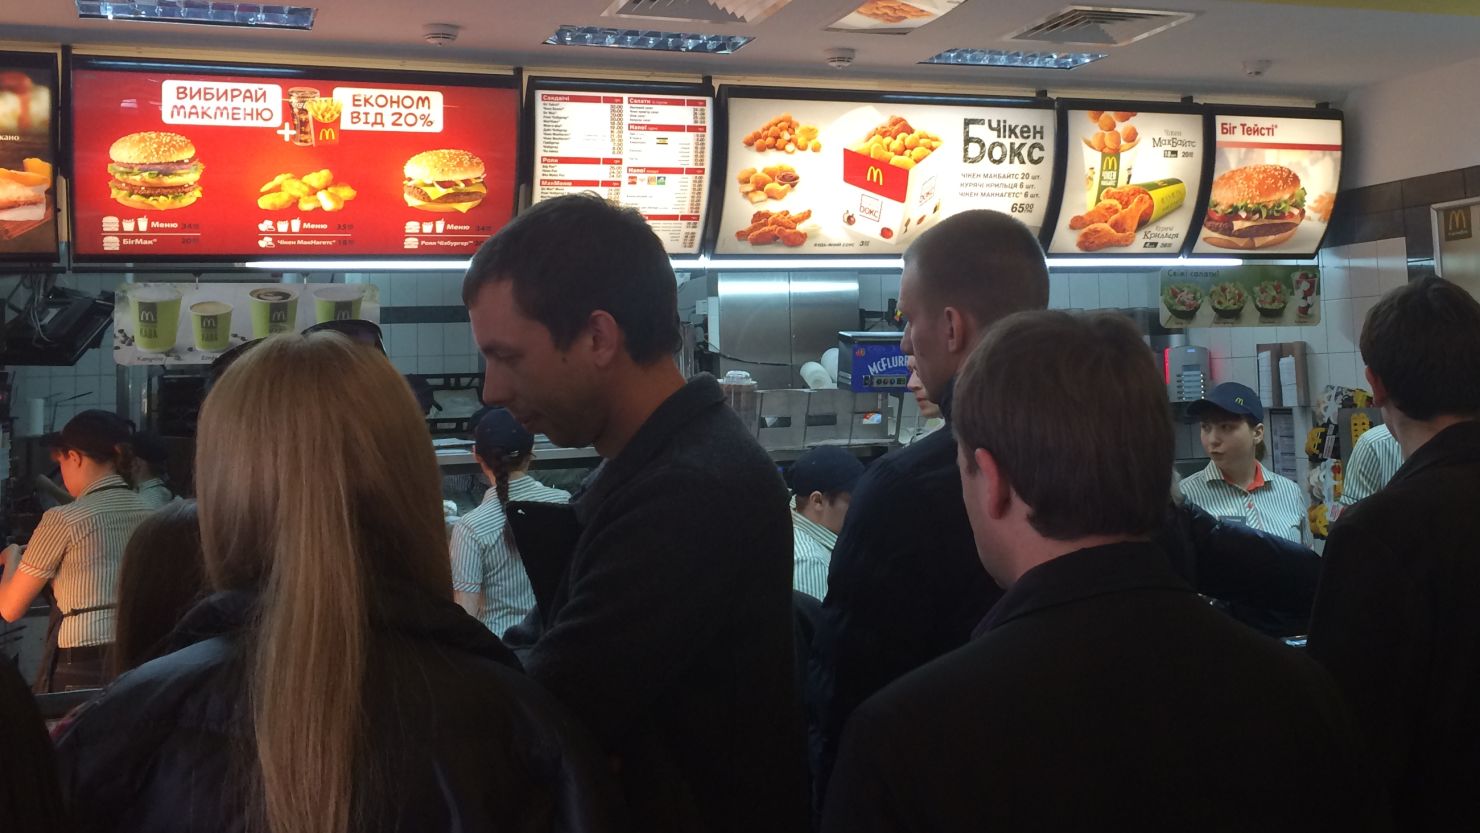 A CNN crew's got to eat, right? Turns out you learn a little something about a country's crisis at McDonald's.